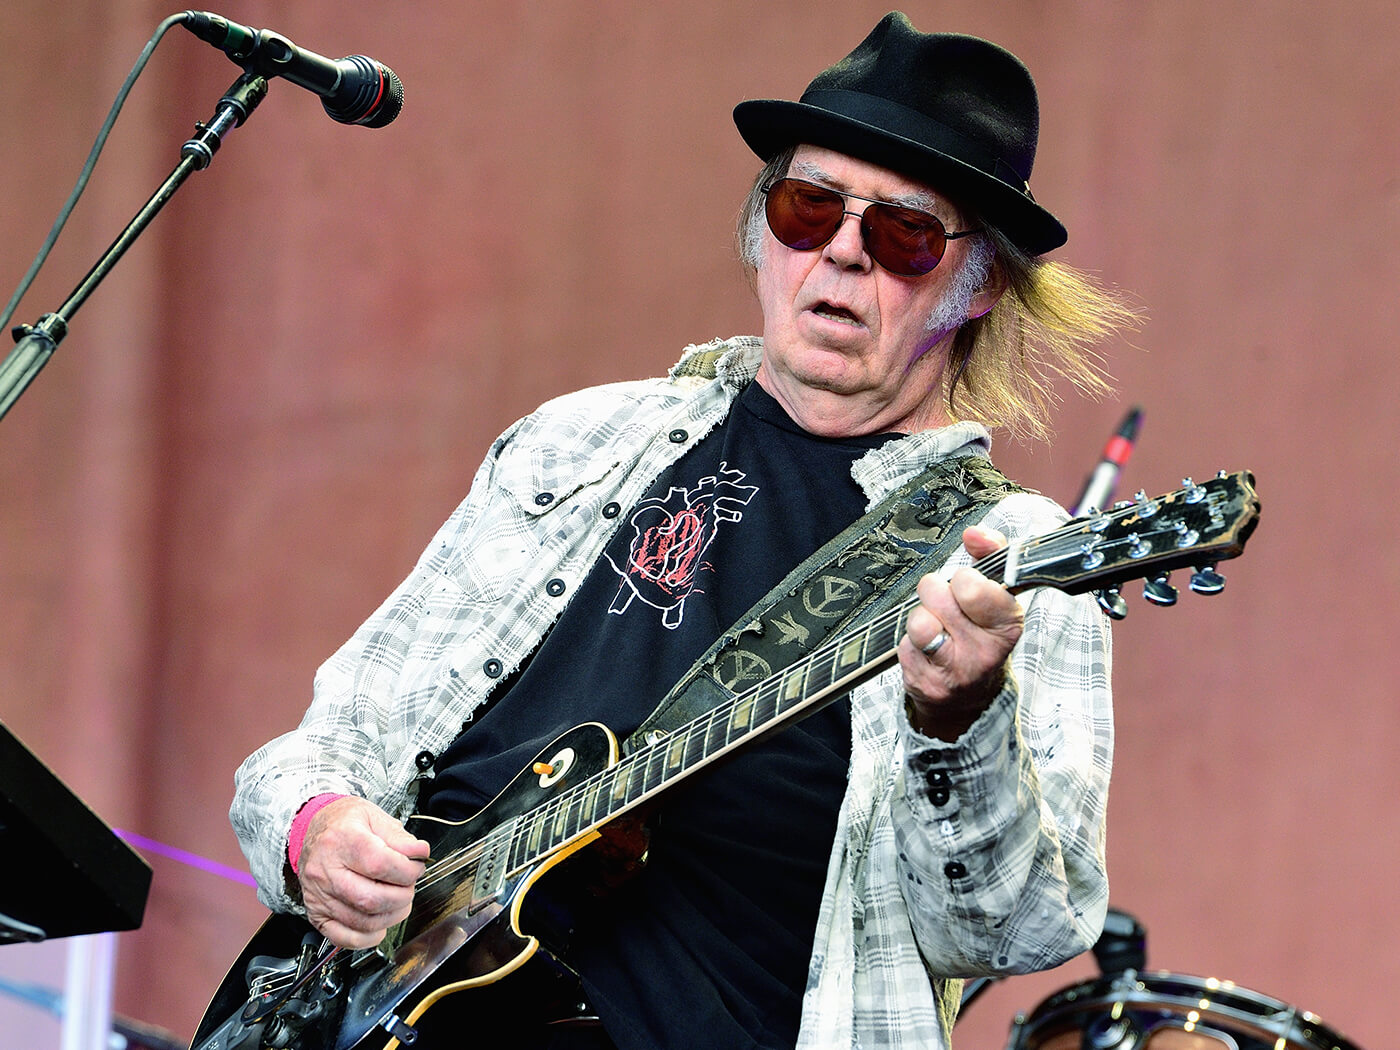 Neil Young - $200 Million Net Worth, The Godfather Of Grunge